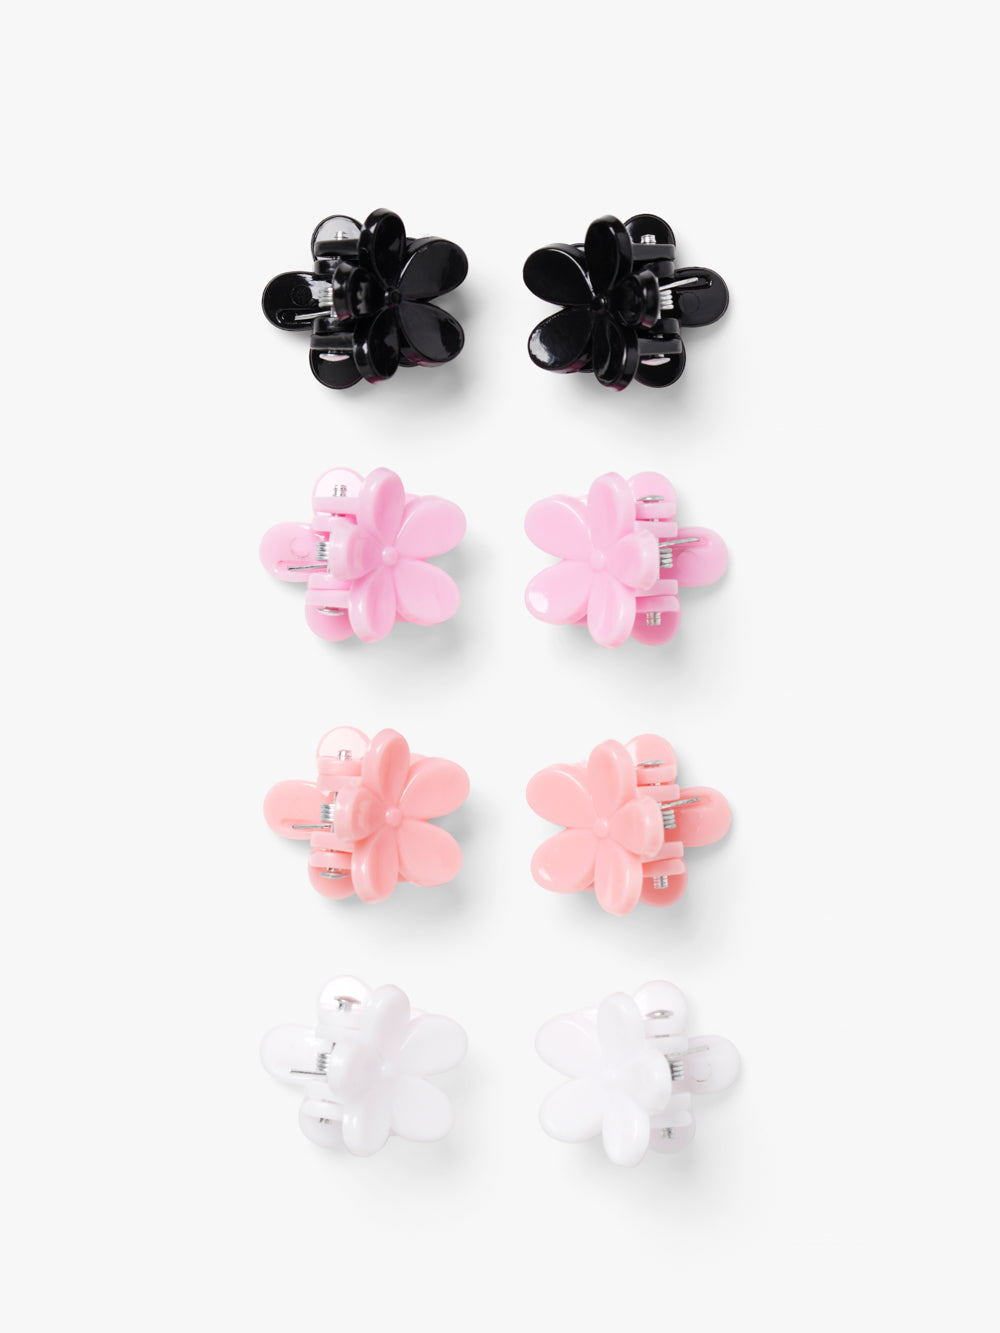 8 Pack, recycled plastic flower mini bulldog clips in black, pink and white